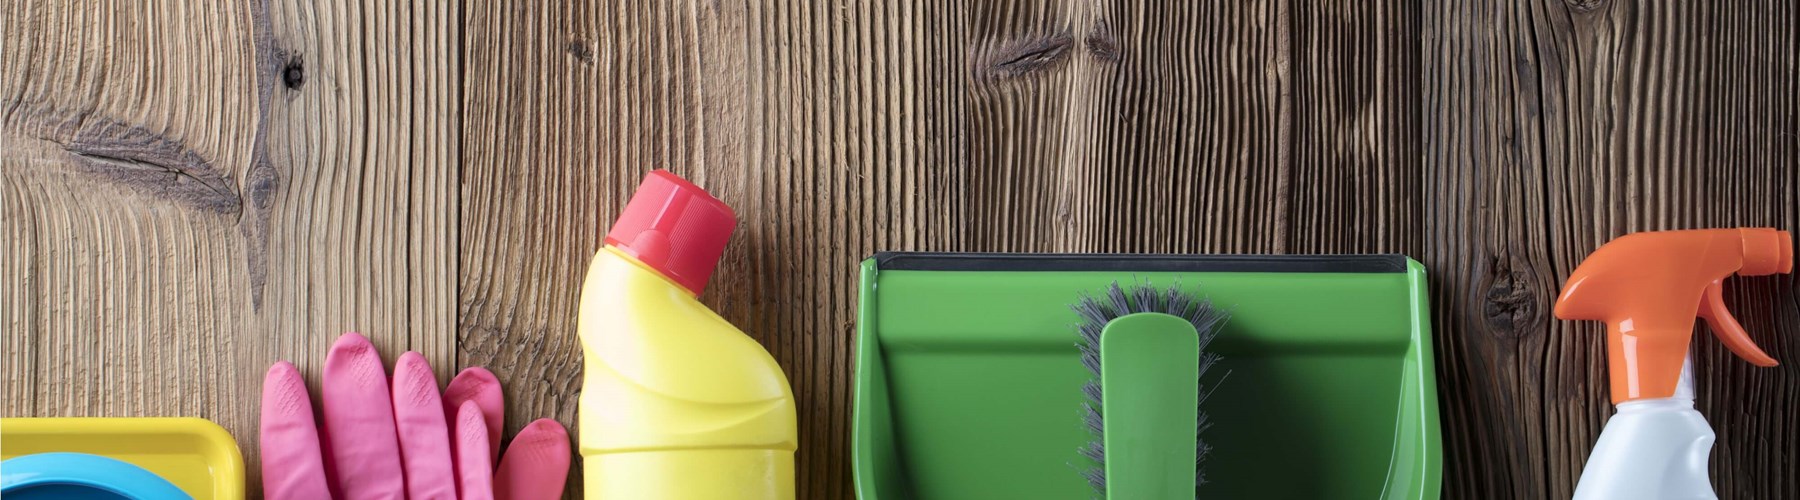 Household cleaning items on wooden flooring 